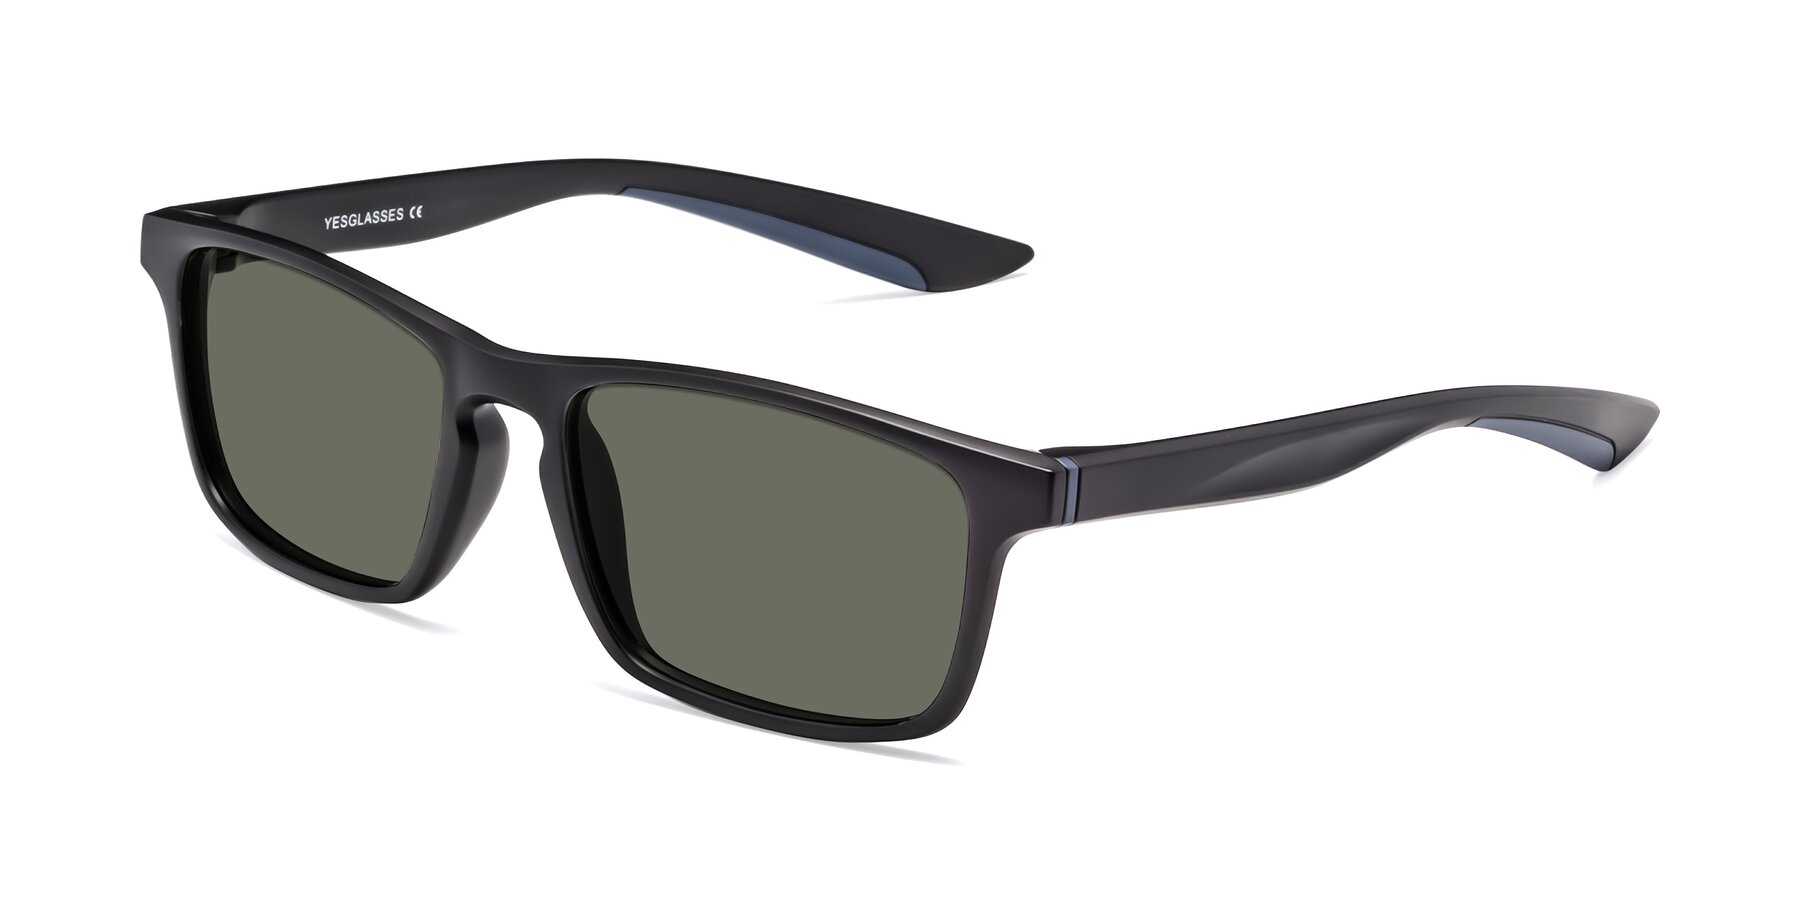 Angle of Passion in Matte Black-Blue with Gray Polarized Lenses